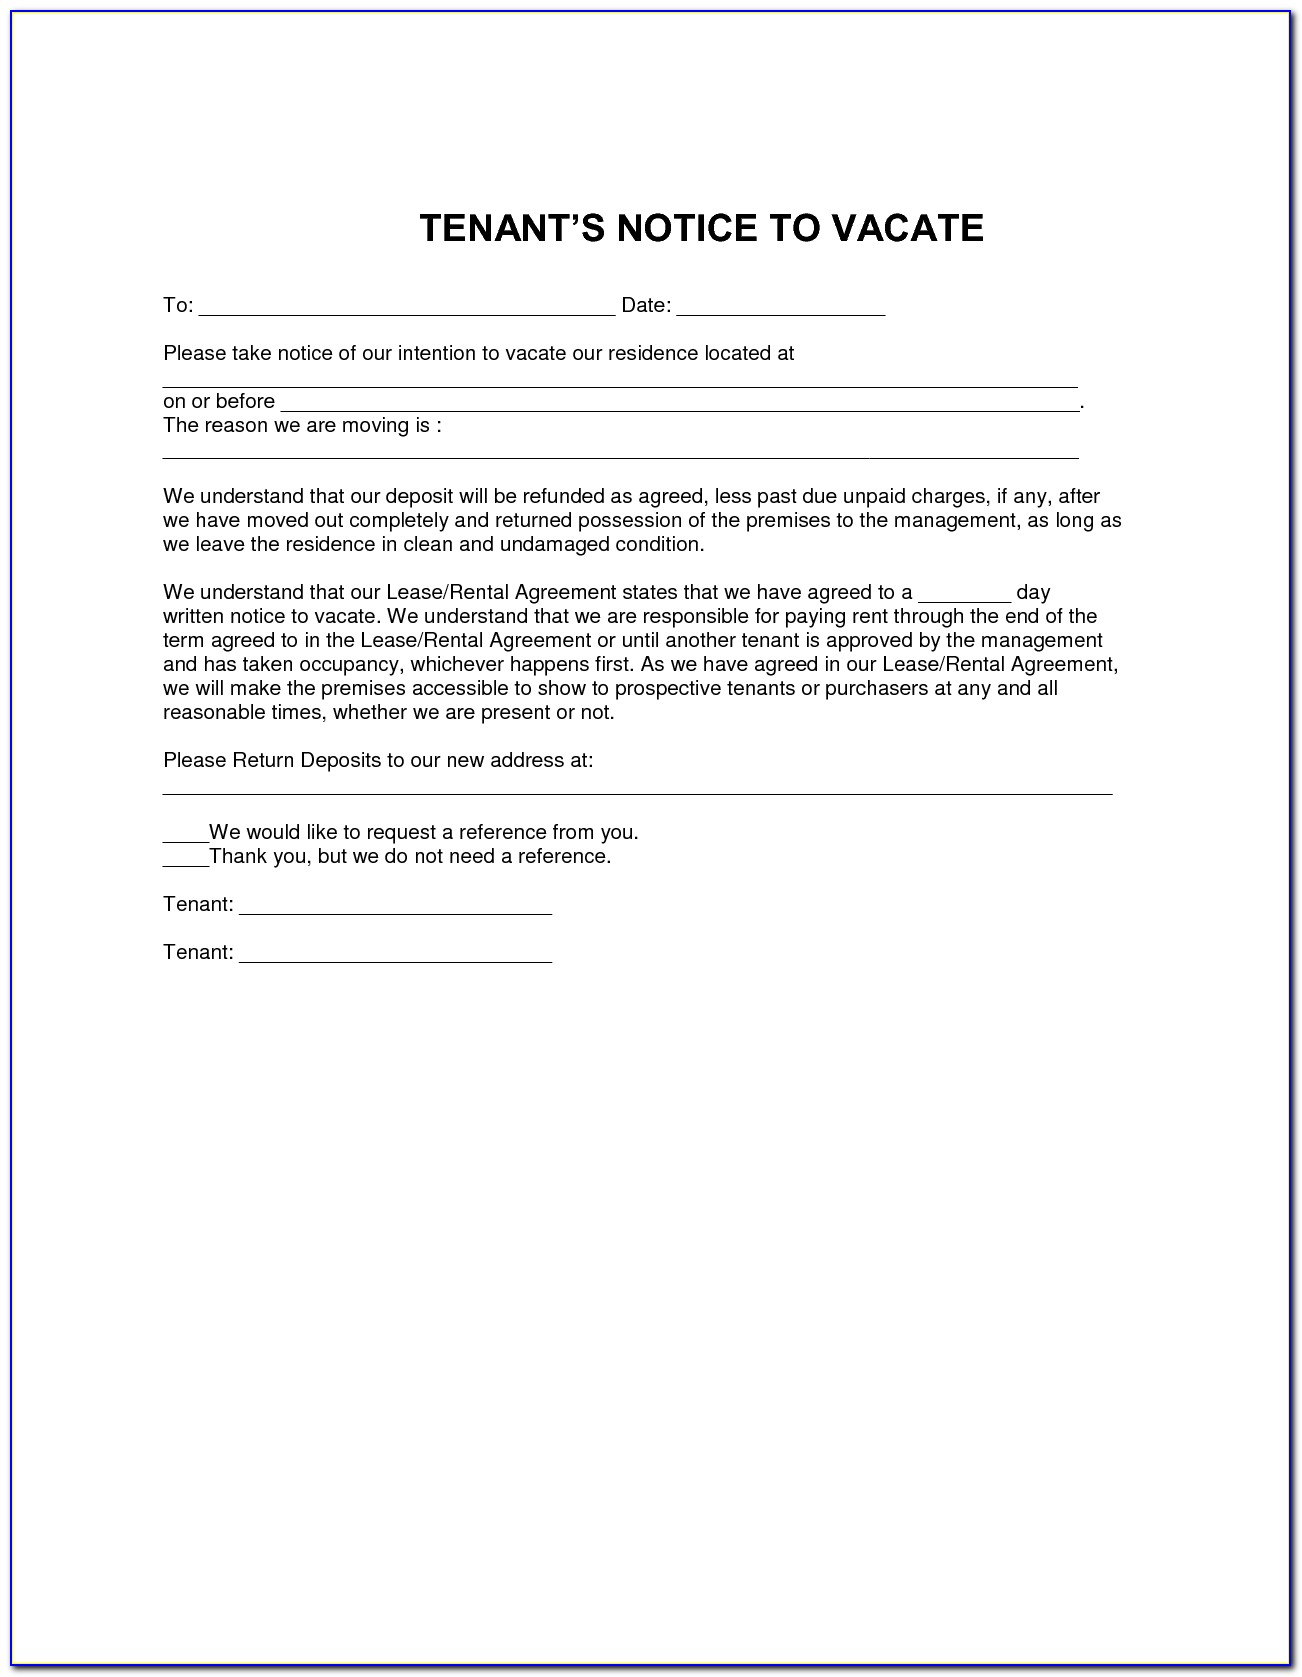 Formal Notice To Vacate Rental Property